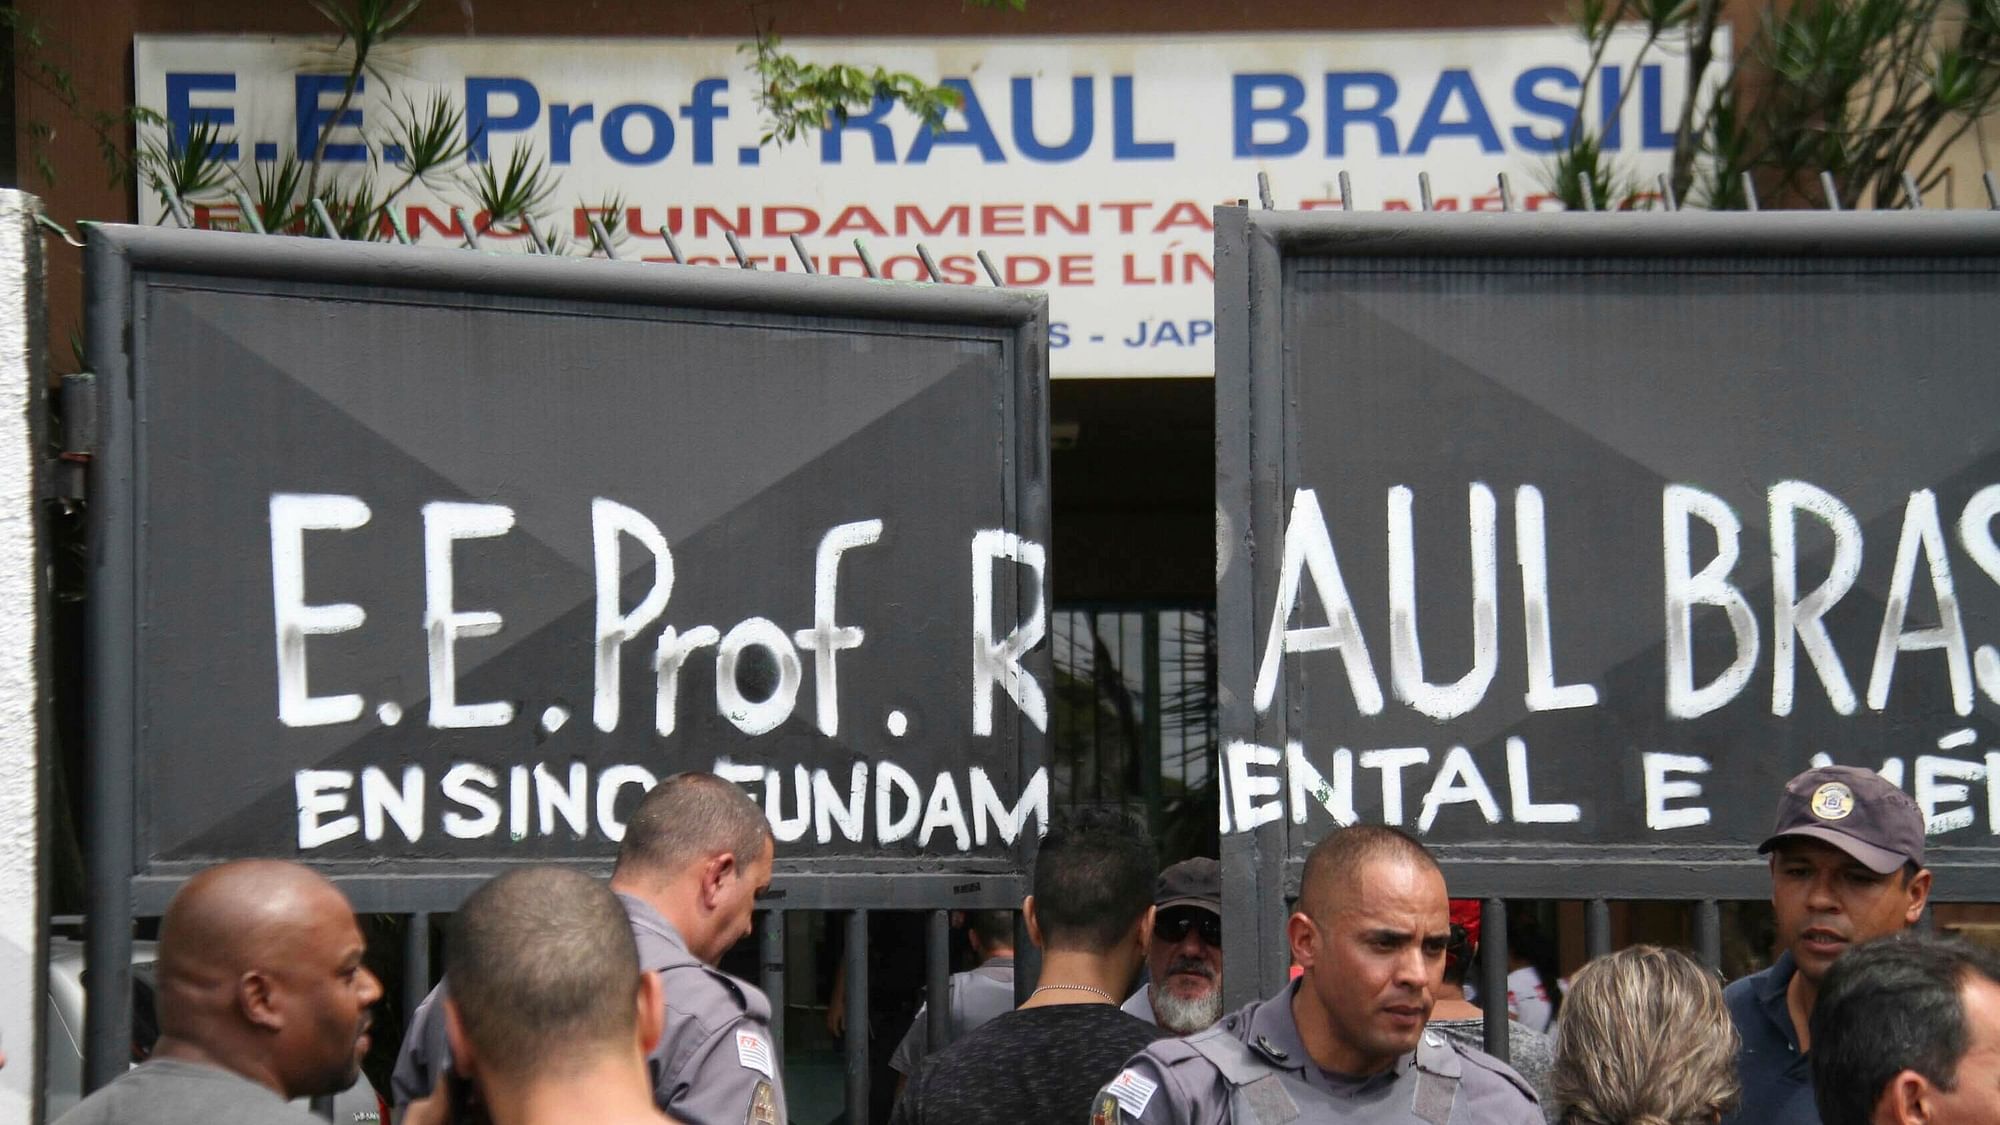 Police officers guard the entrance of the Raul Brasil State School in Suzano, Brazil, where a shooting took place early on Wednesday.